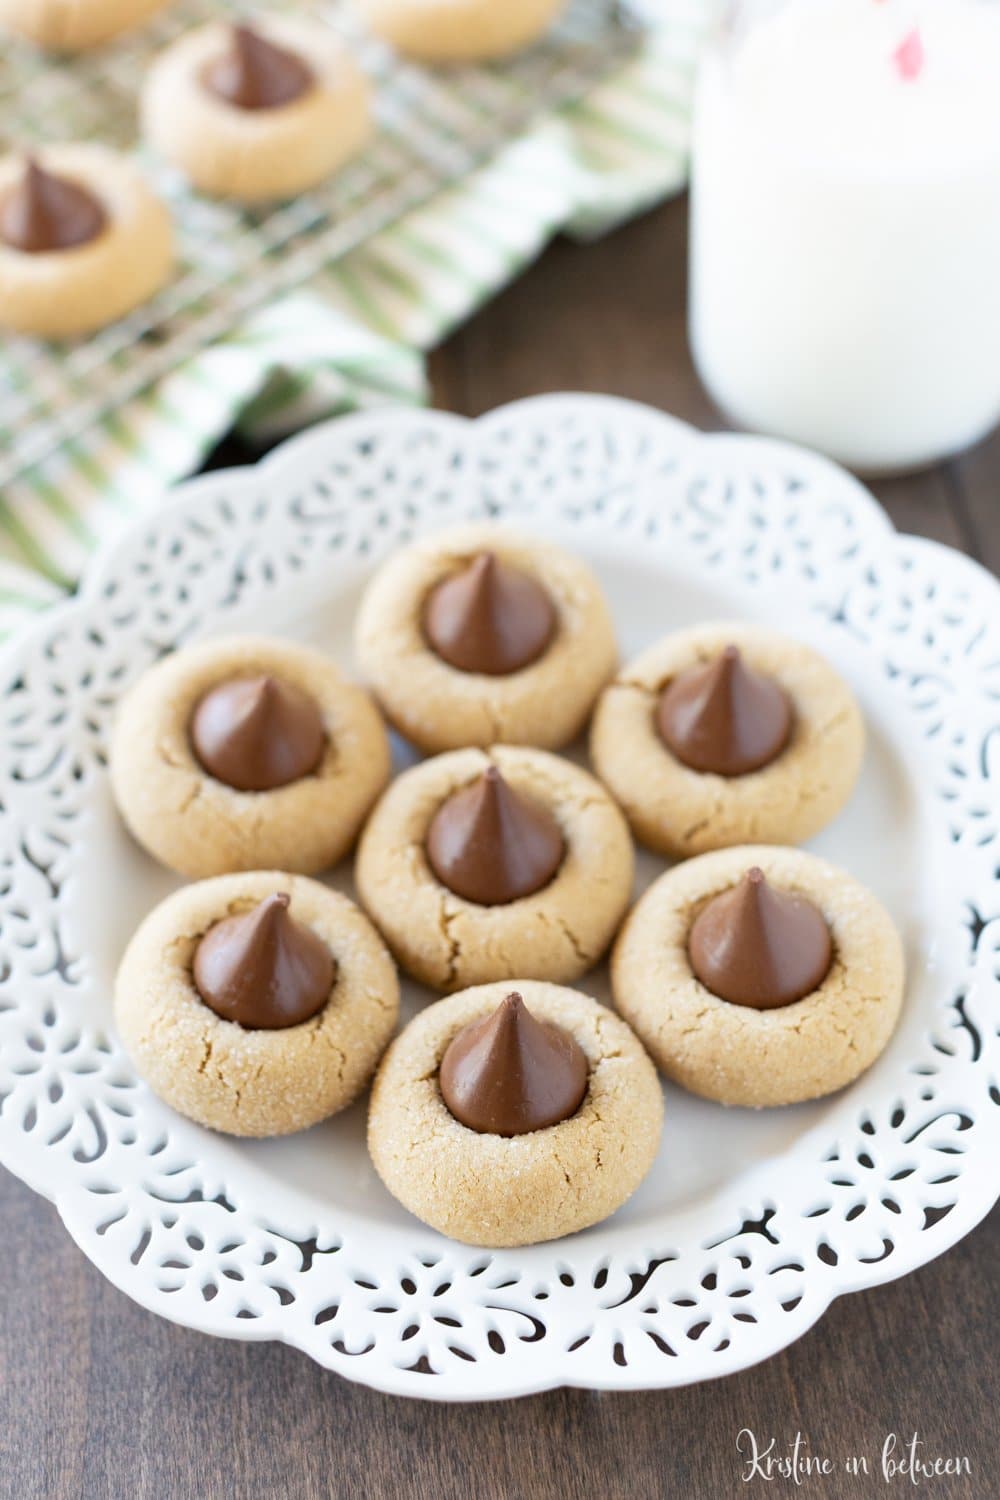 Perfect peanut butter kiss cookies. A holiday classic! This is an old family recipe that has been tested over the years.